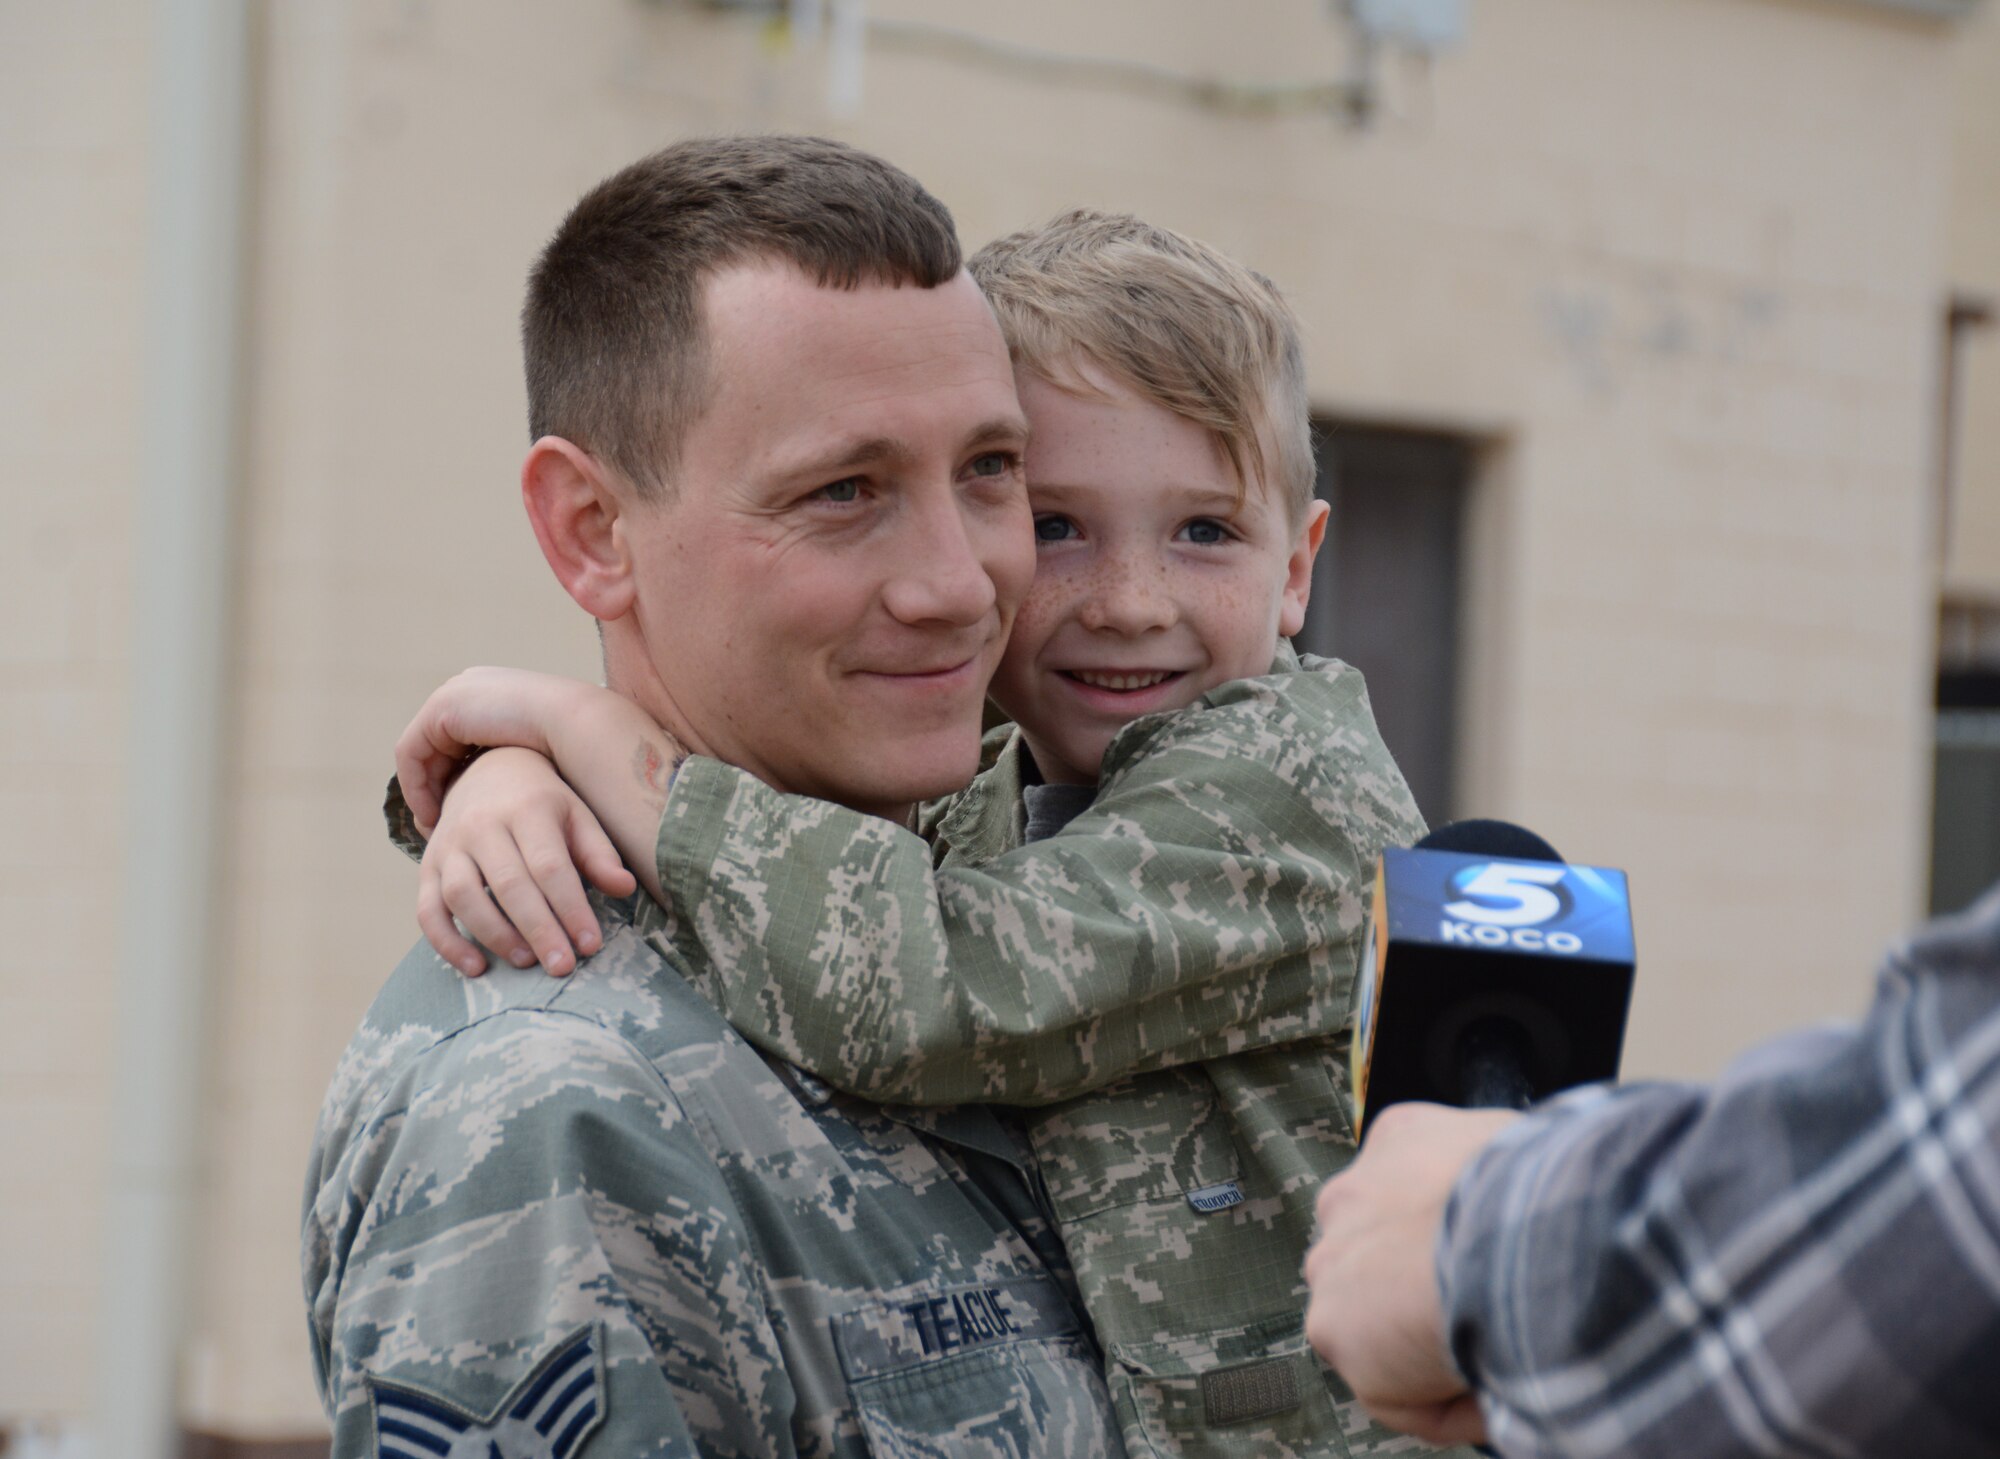 Senior Airman Kevin Teague of the 507th Aircraft Maintenance Squadron holds his son, Aiden, while being interviewed by local media following a deployment Feb. 19, 2017, at Tinker Air Force Base, Okla. More than 90 Reservists deployed in December 2016 in support of air operations at Incirlik Air Base, Turkey, against the Islamic State group. (U.S. Air Force photo/Tech. Sgt. Lauren Gleason)